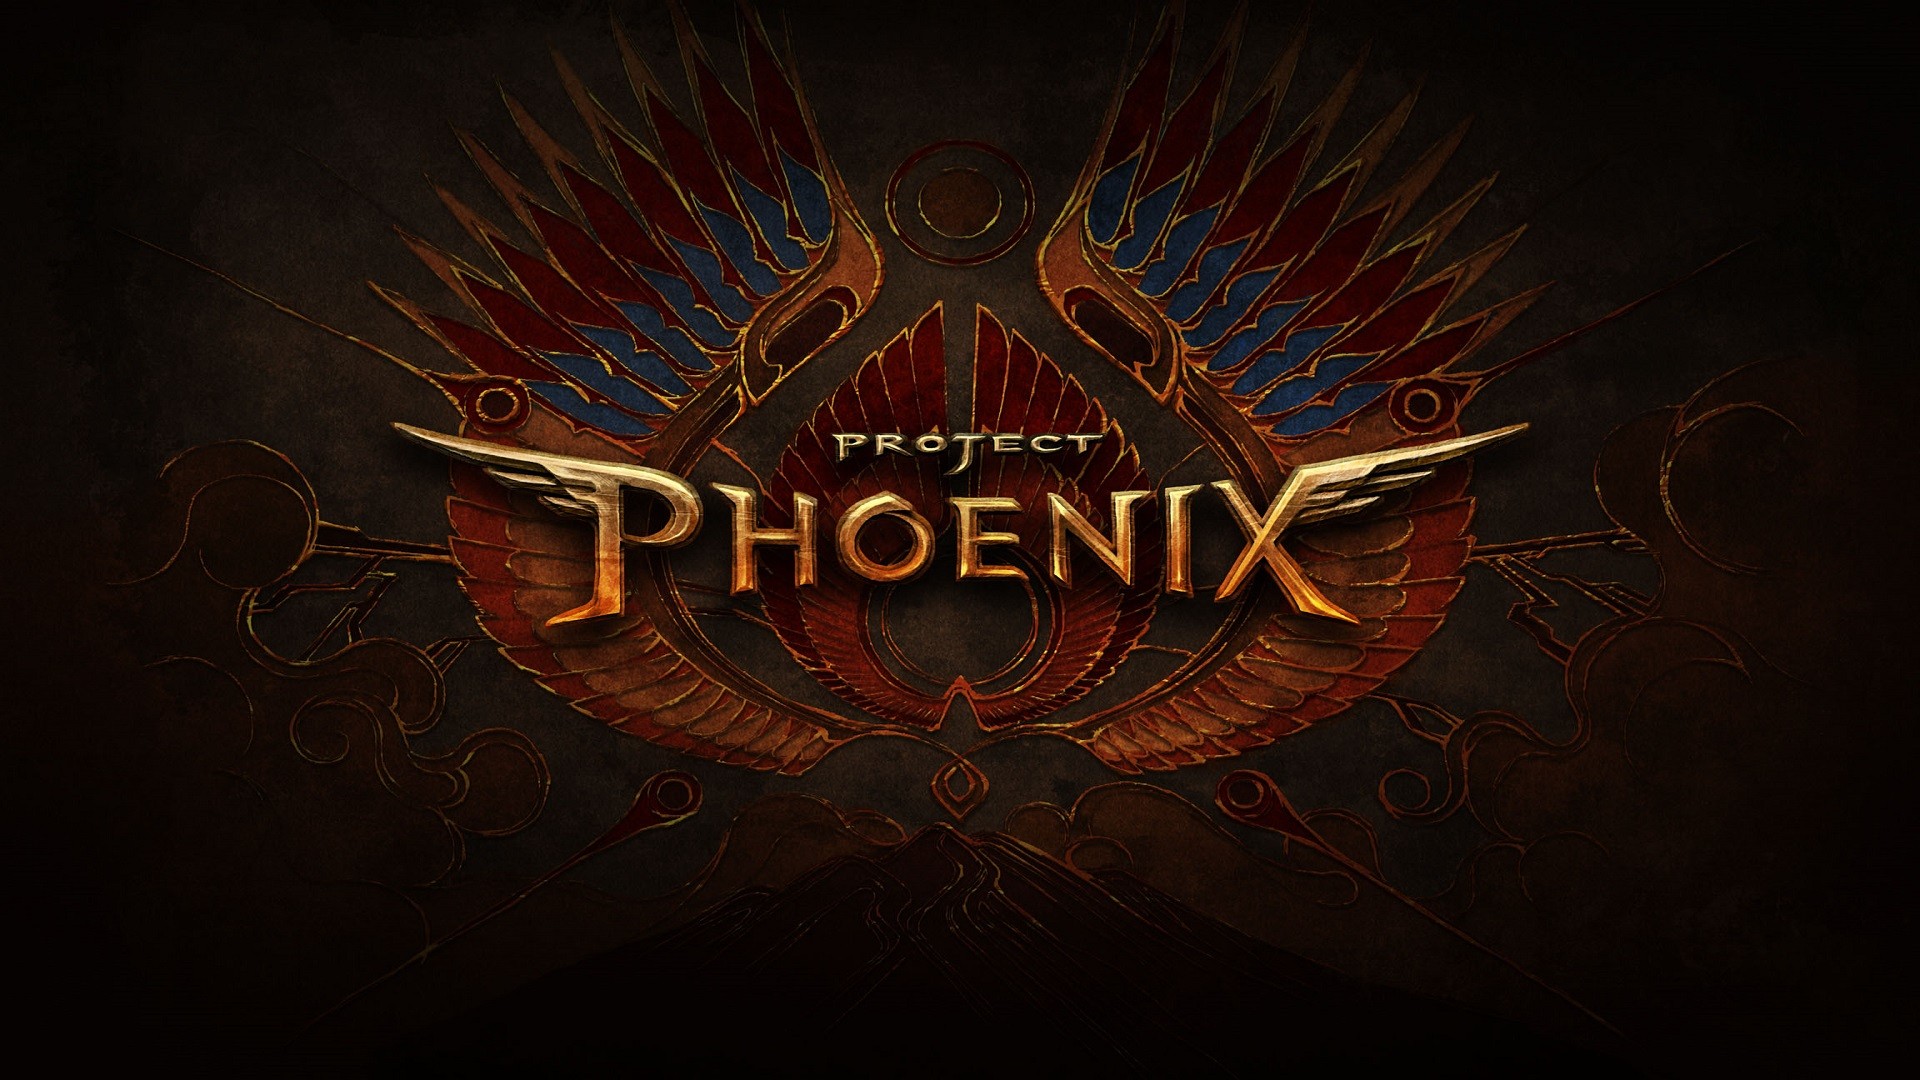 Wallpaper Phoenix HD With Resolution 1920X1080 pixel. You can make this wallpaper for your Desktop Computer Backgrounds, Mac Wallpapers, Android Lock screen or iPhone Screensavers